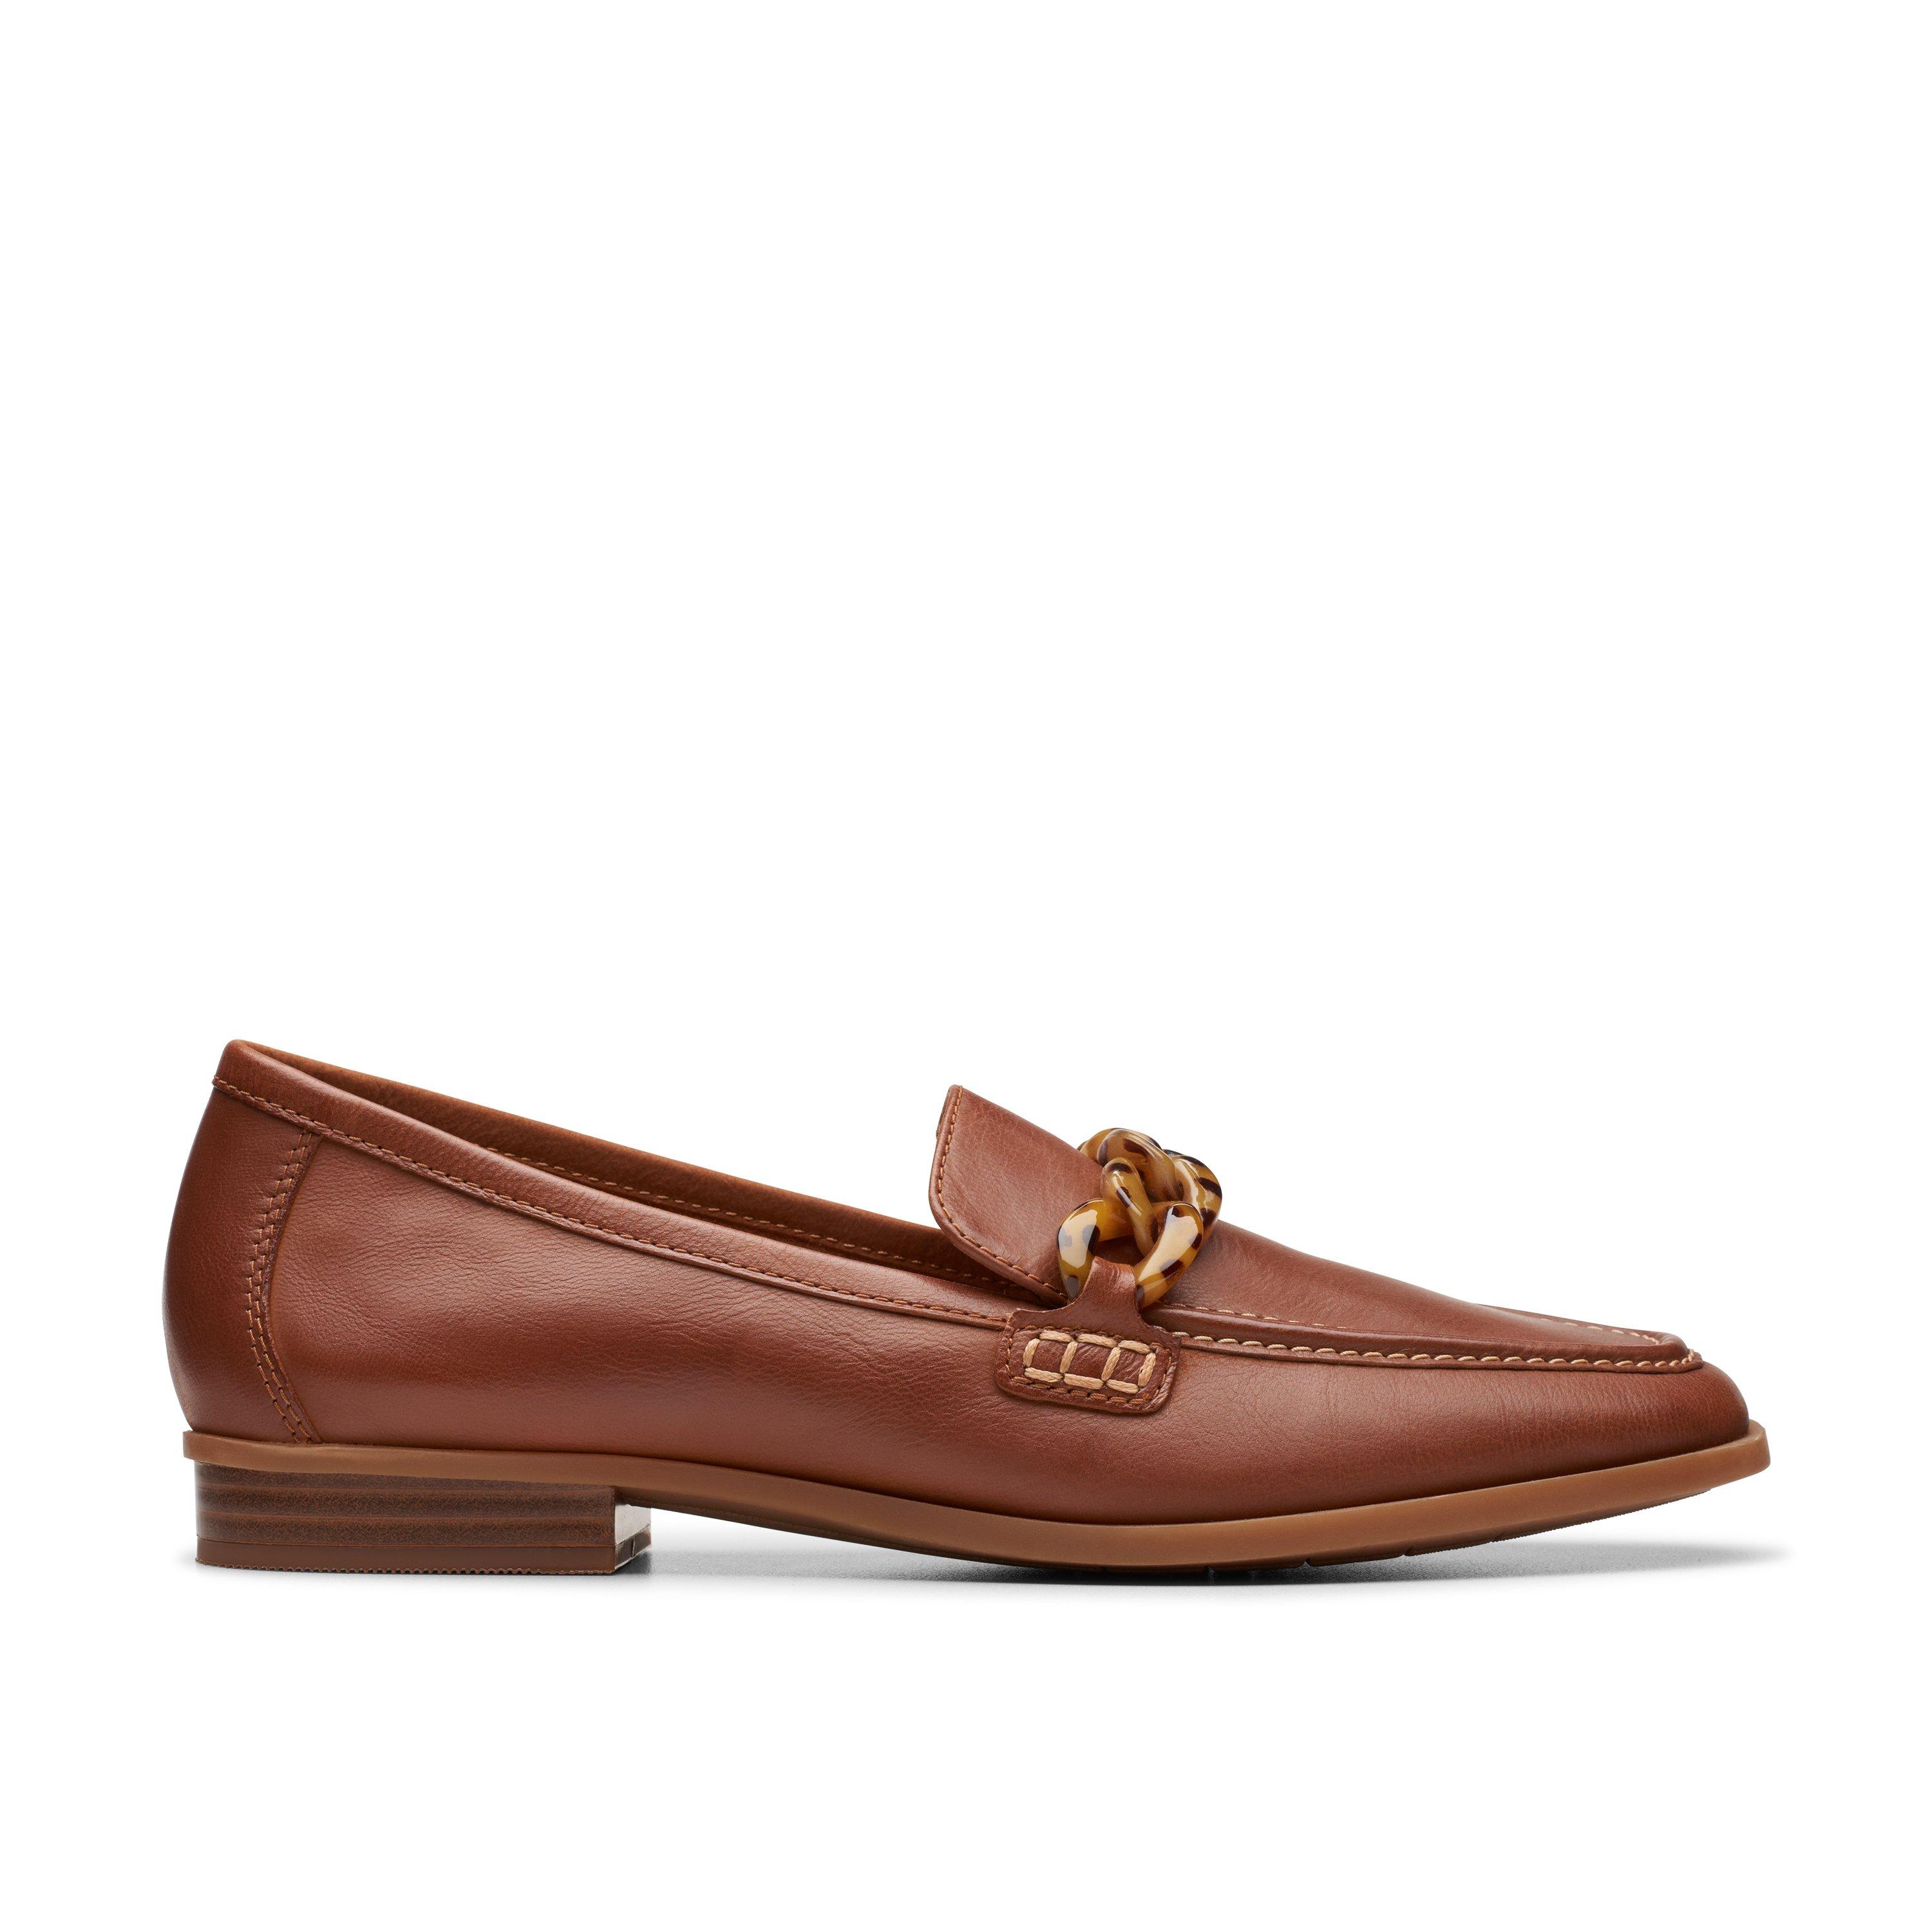 WOMENS Sarafyna Iris Tan Leather Loafers | Clarks US